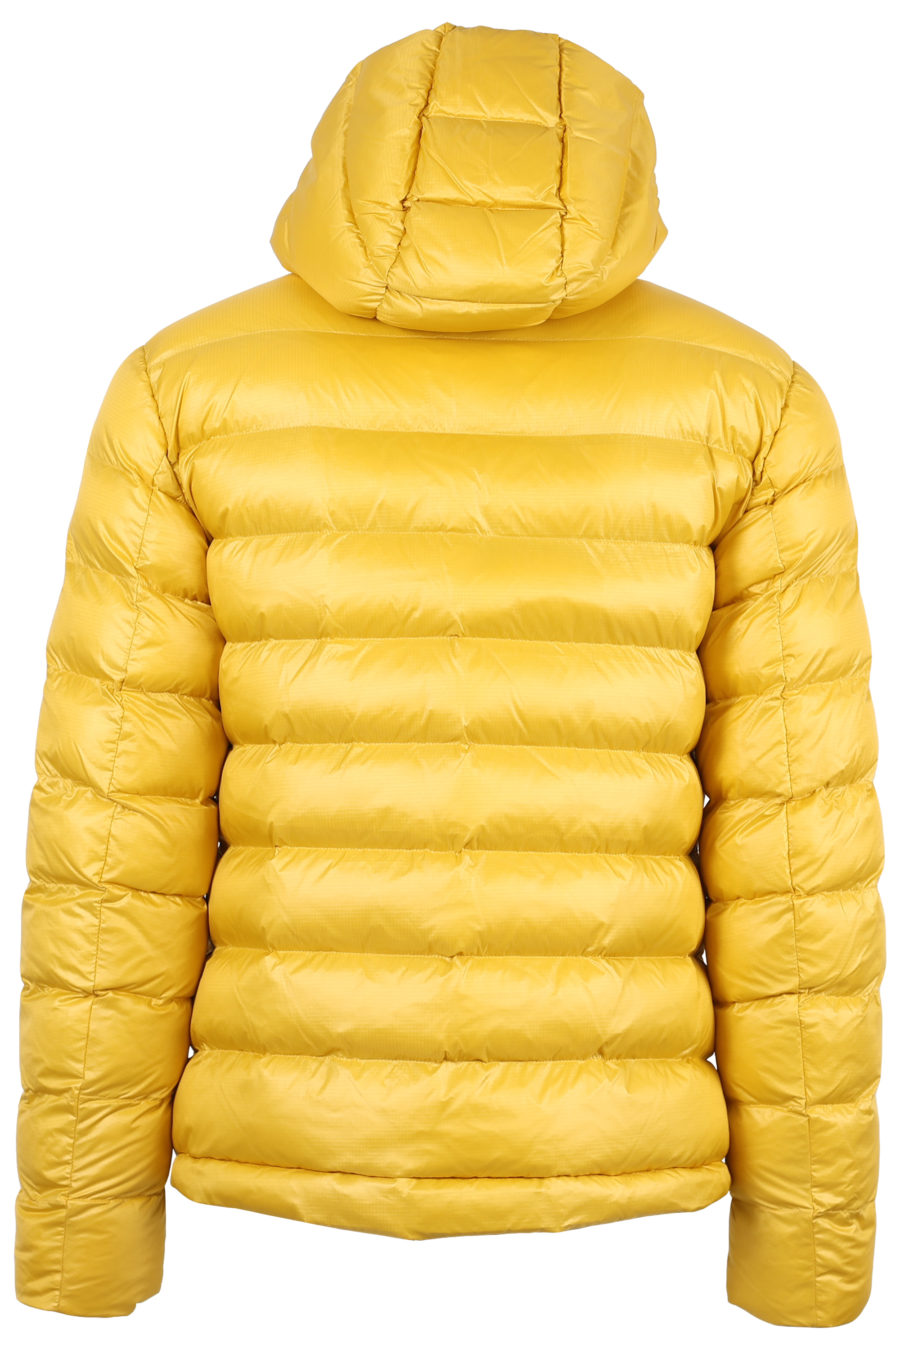 Yellow quilted down jacket with eco-friendly padding - IMG 1316